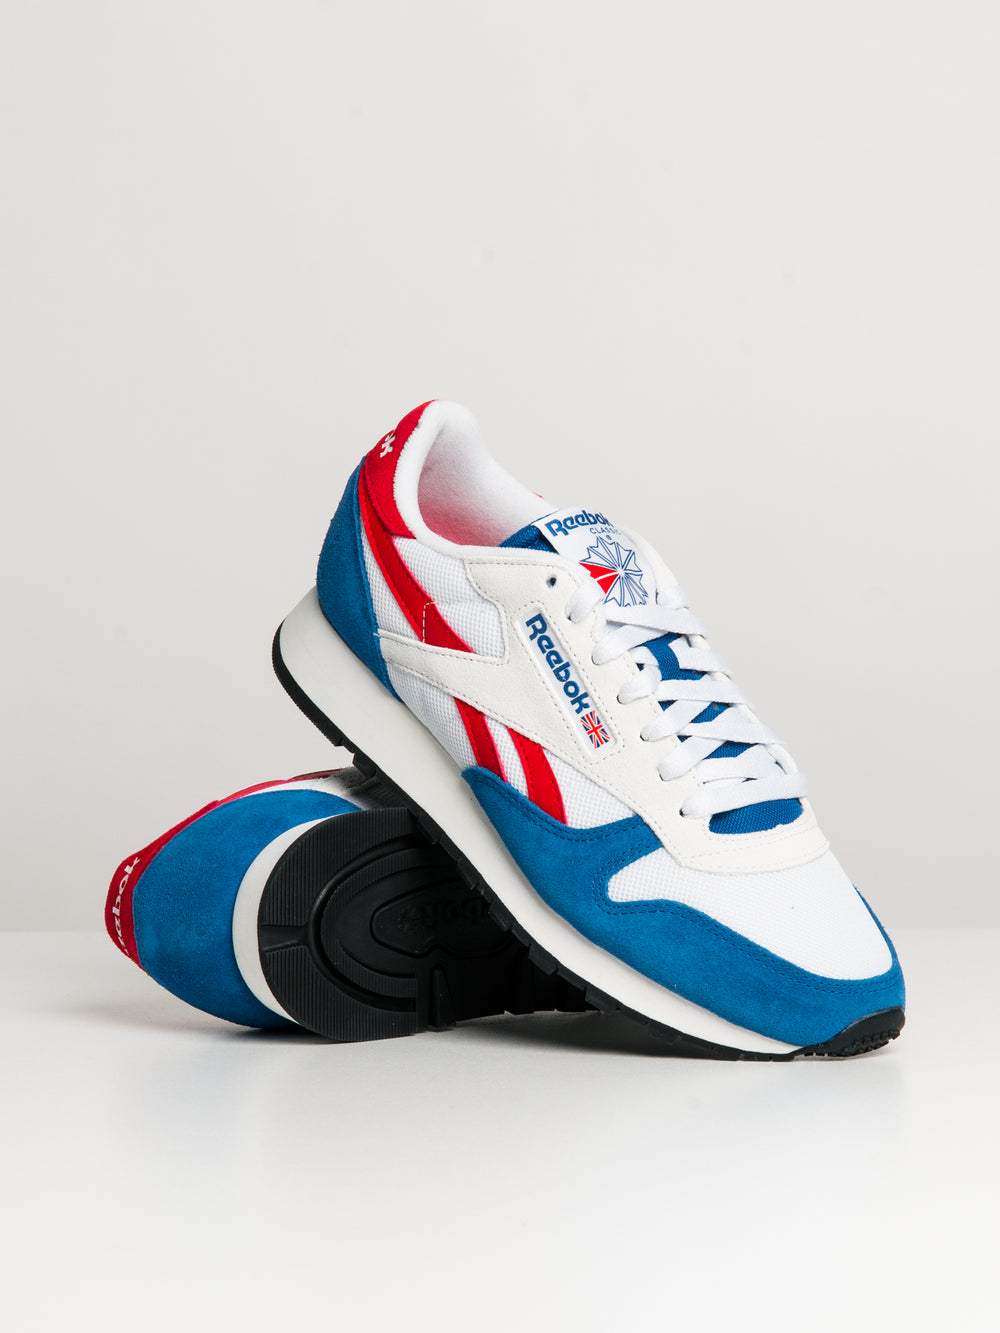 REEBOK CLASSIC LEATHER SNEAKER MENS - CLEARANCE